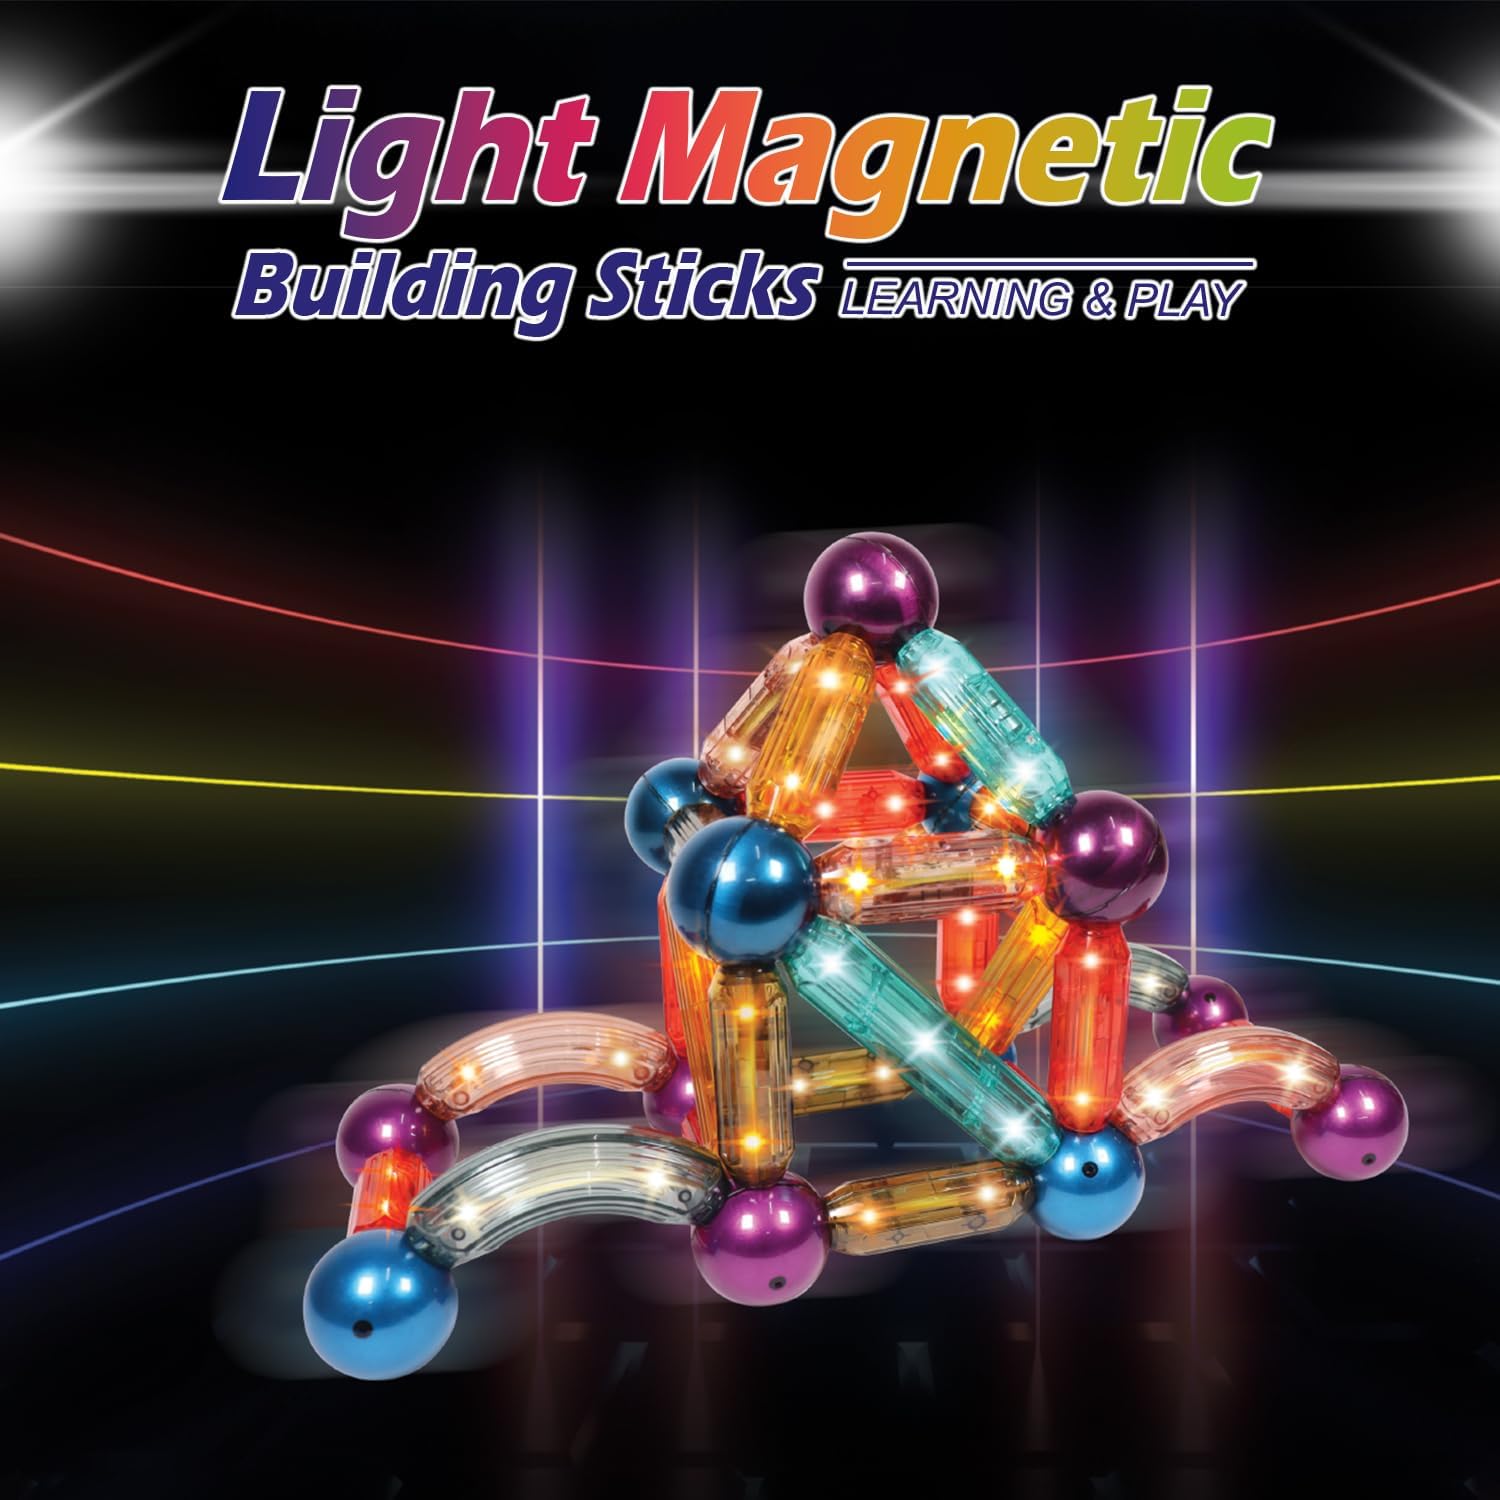 LED Magnetic Sticks and Balls 52 Pcs Roundels Set Create Mesmerizing Light Patterns with Transparency and Color Magnetic Building Blocks Toys for Kids